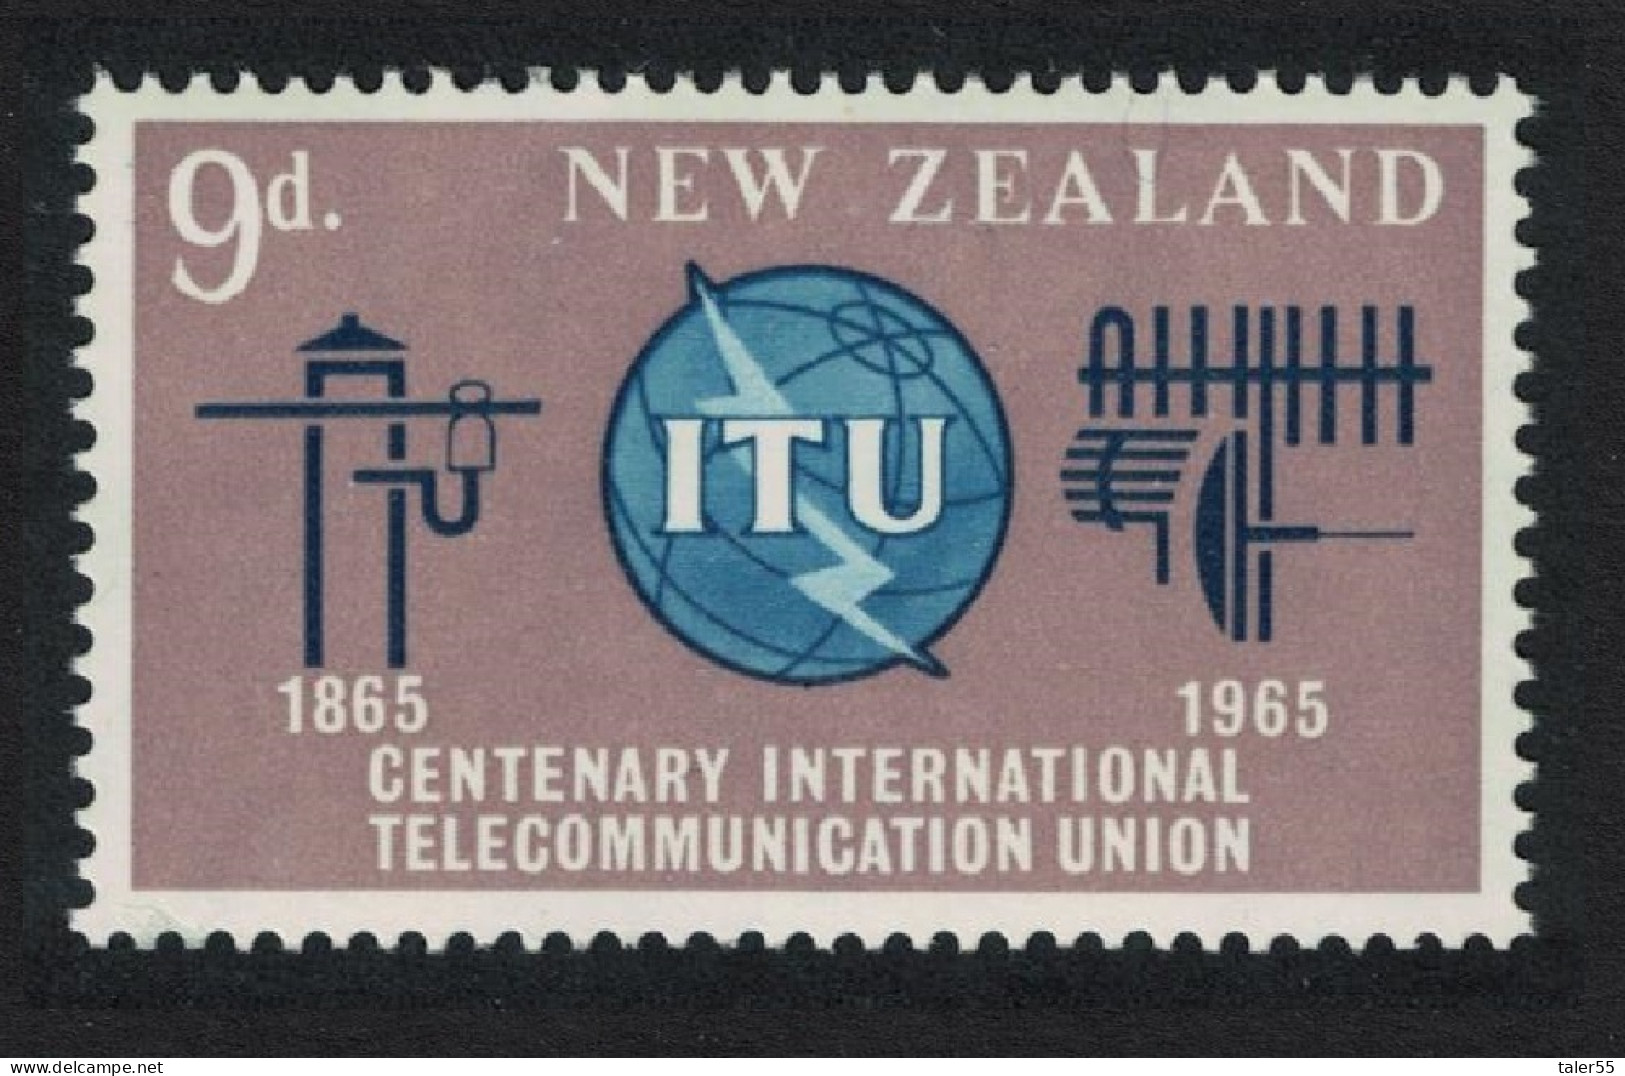 New Zealand Centenary Of ITU 1965 MH SG#828 - Unused Stamps